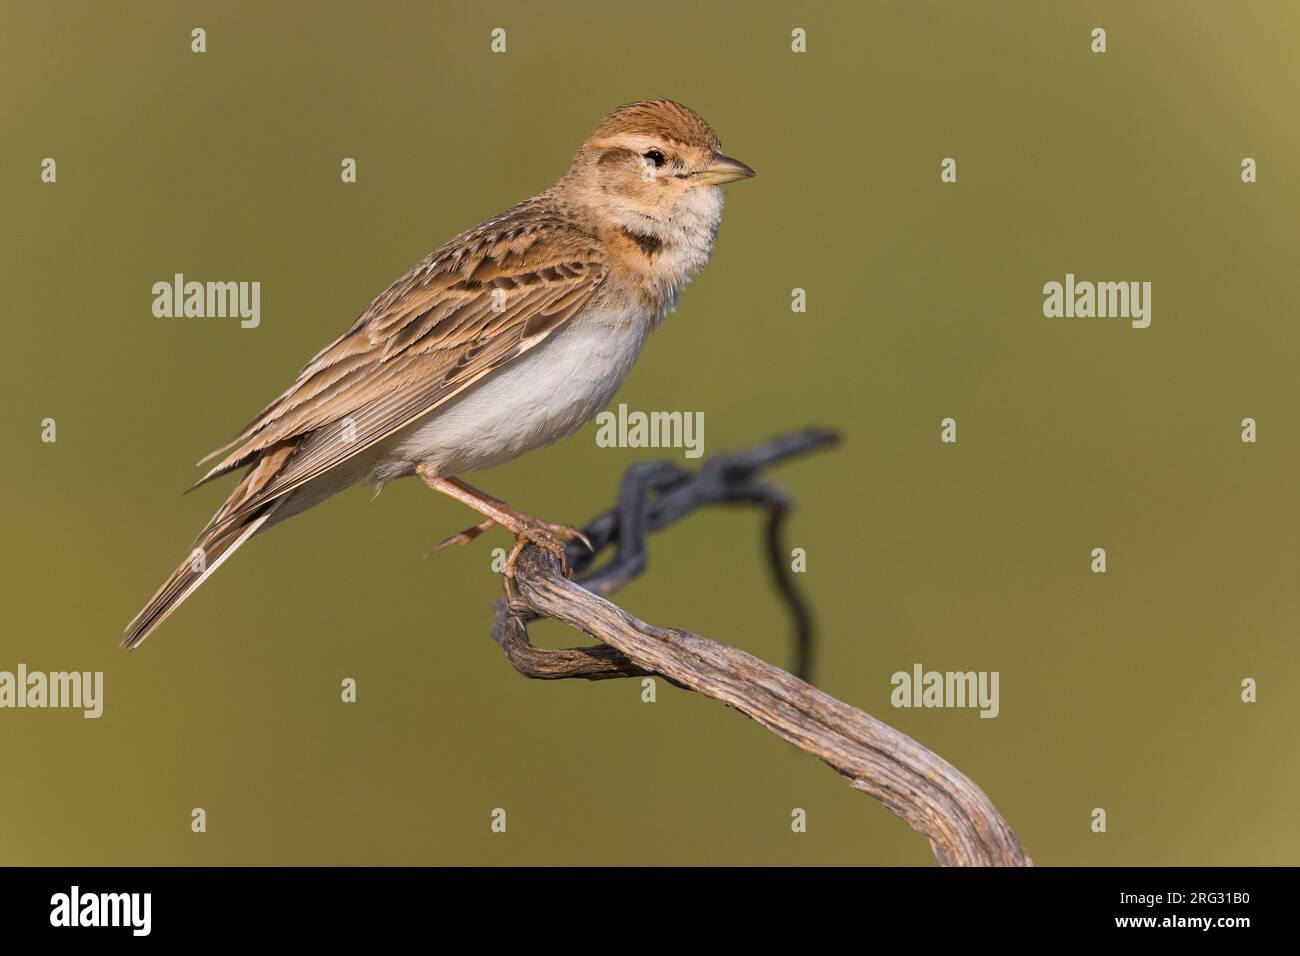 Adult Greater Short-toed Lark, Calandrella brachydactyla,  during spring in Italy. Stock Photo